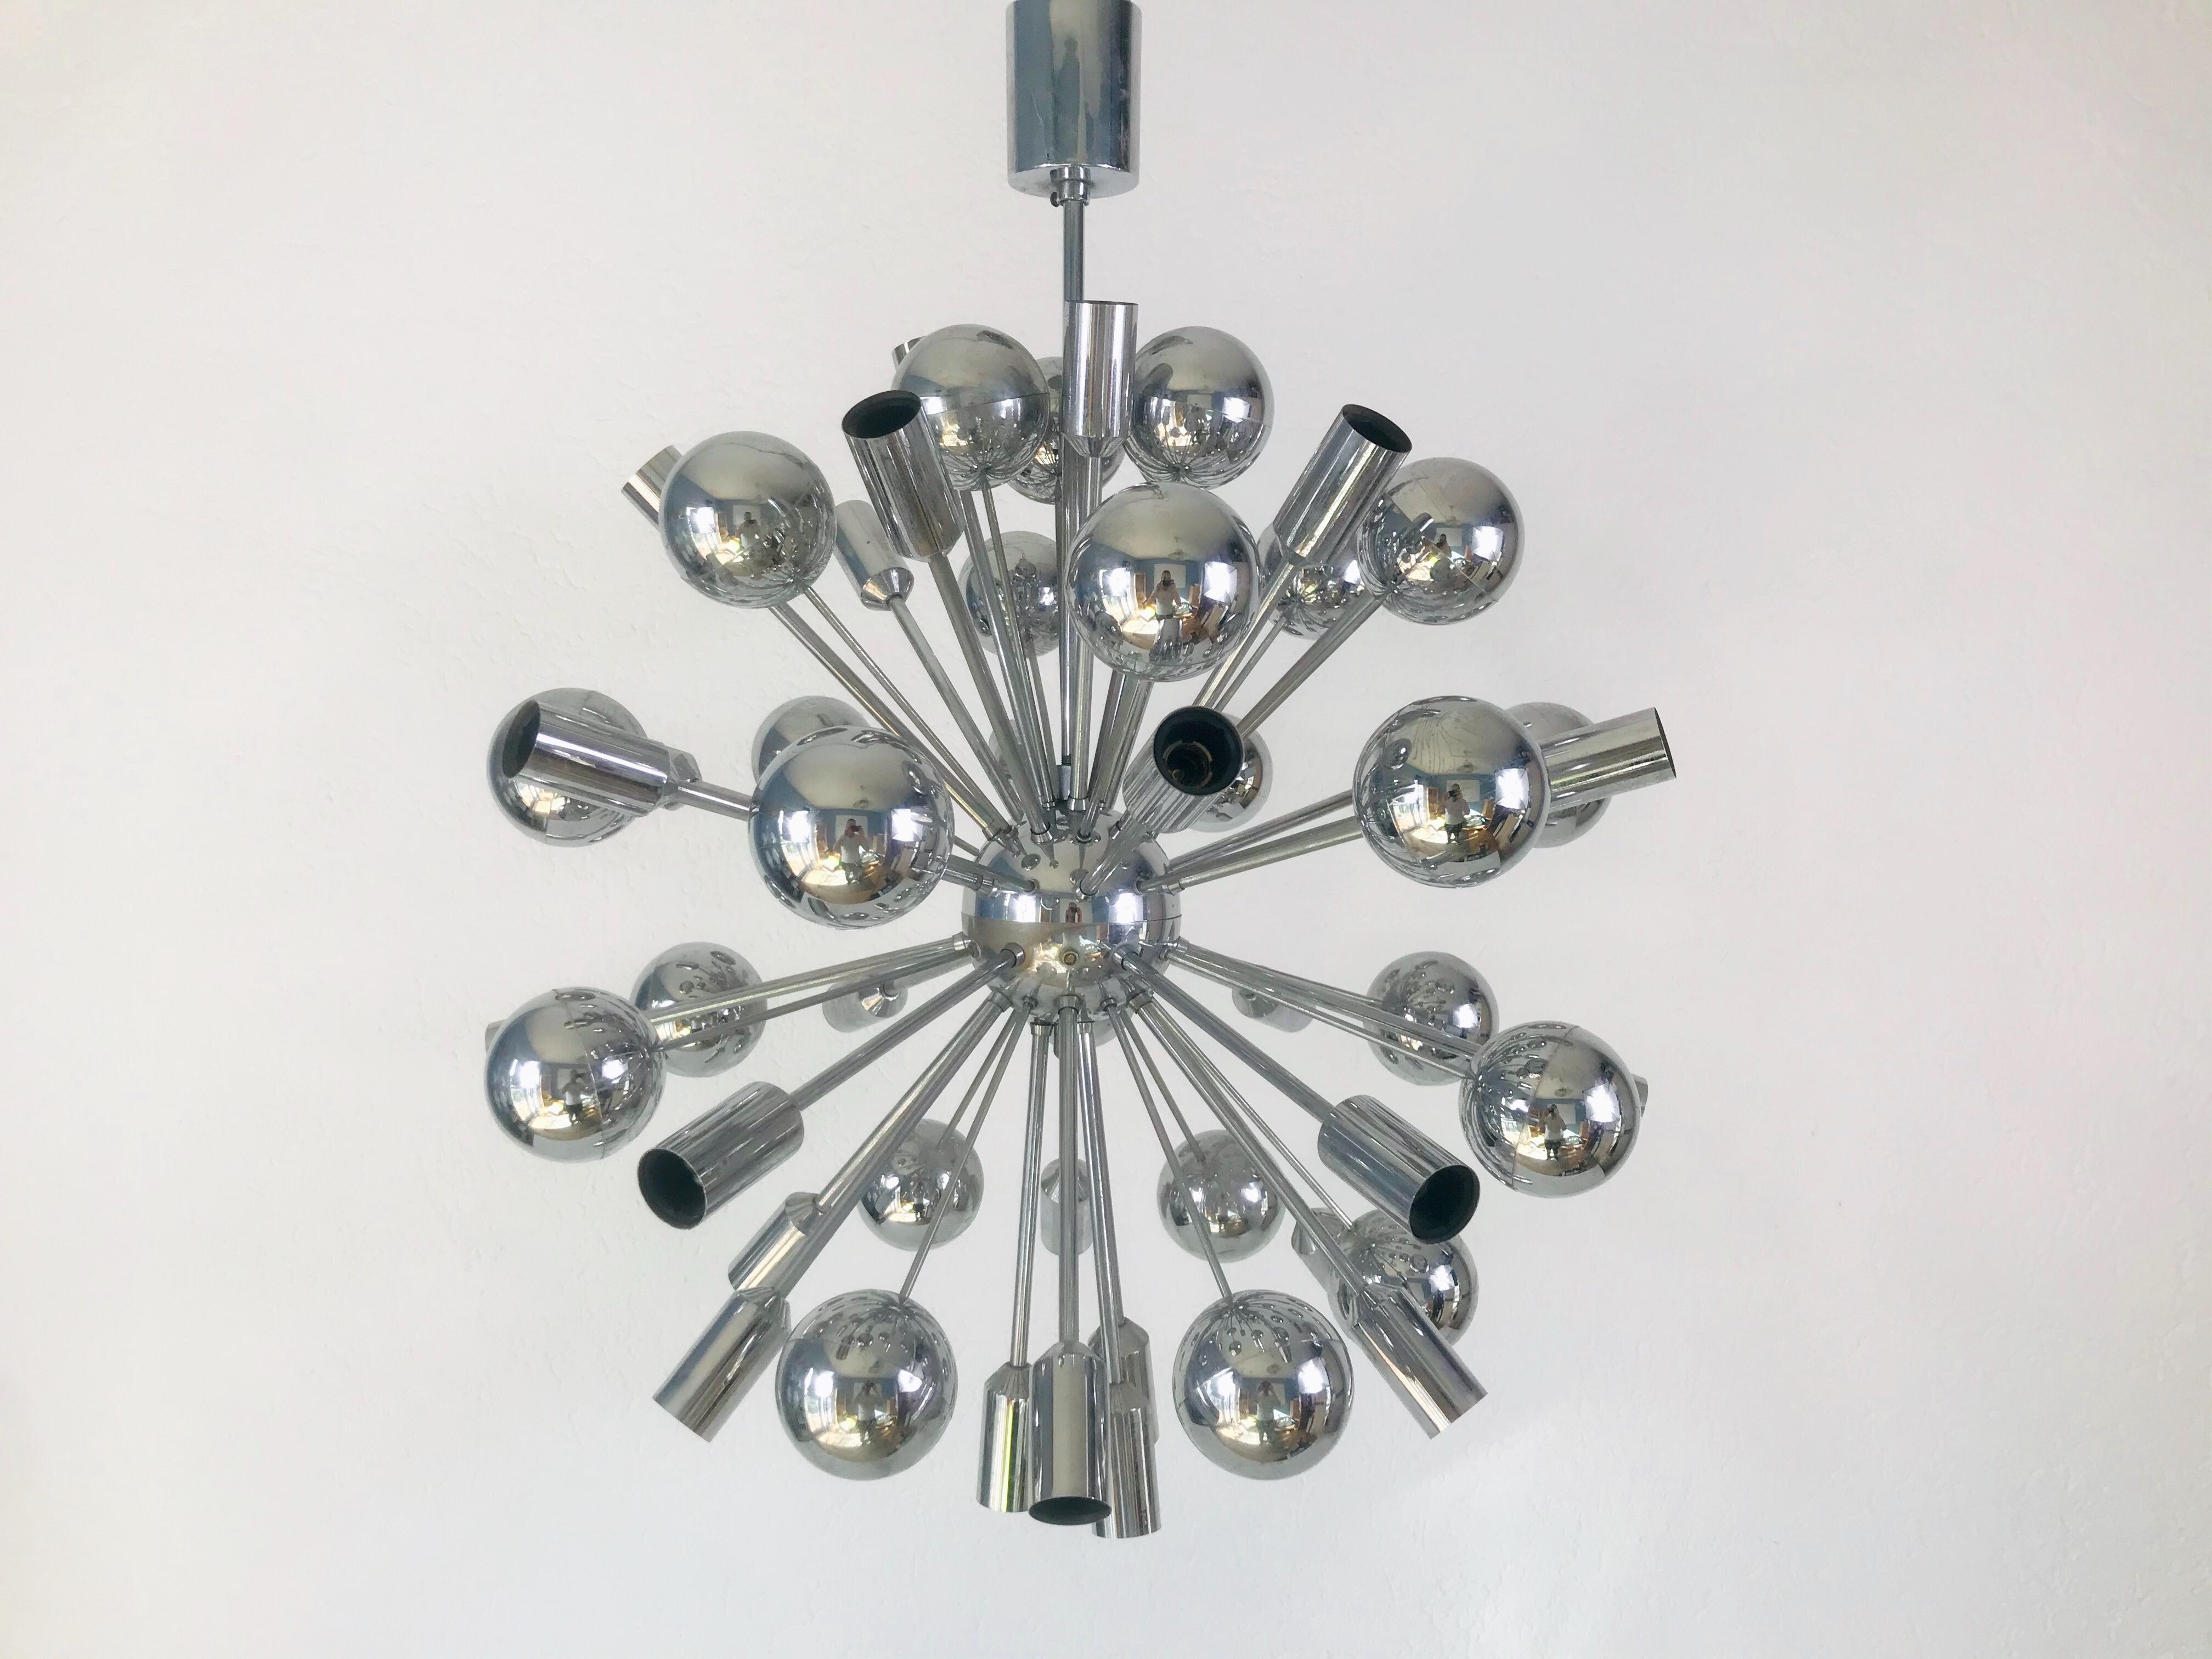 Rare Large Space Age Chrome Chandelier by Cosack Leuchten, 1970s, Germany For Sale 1